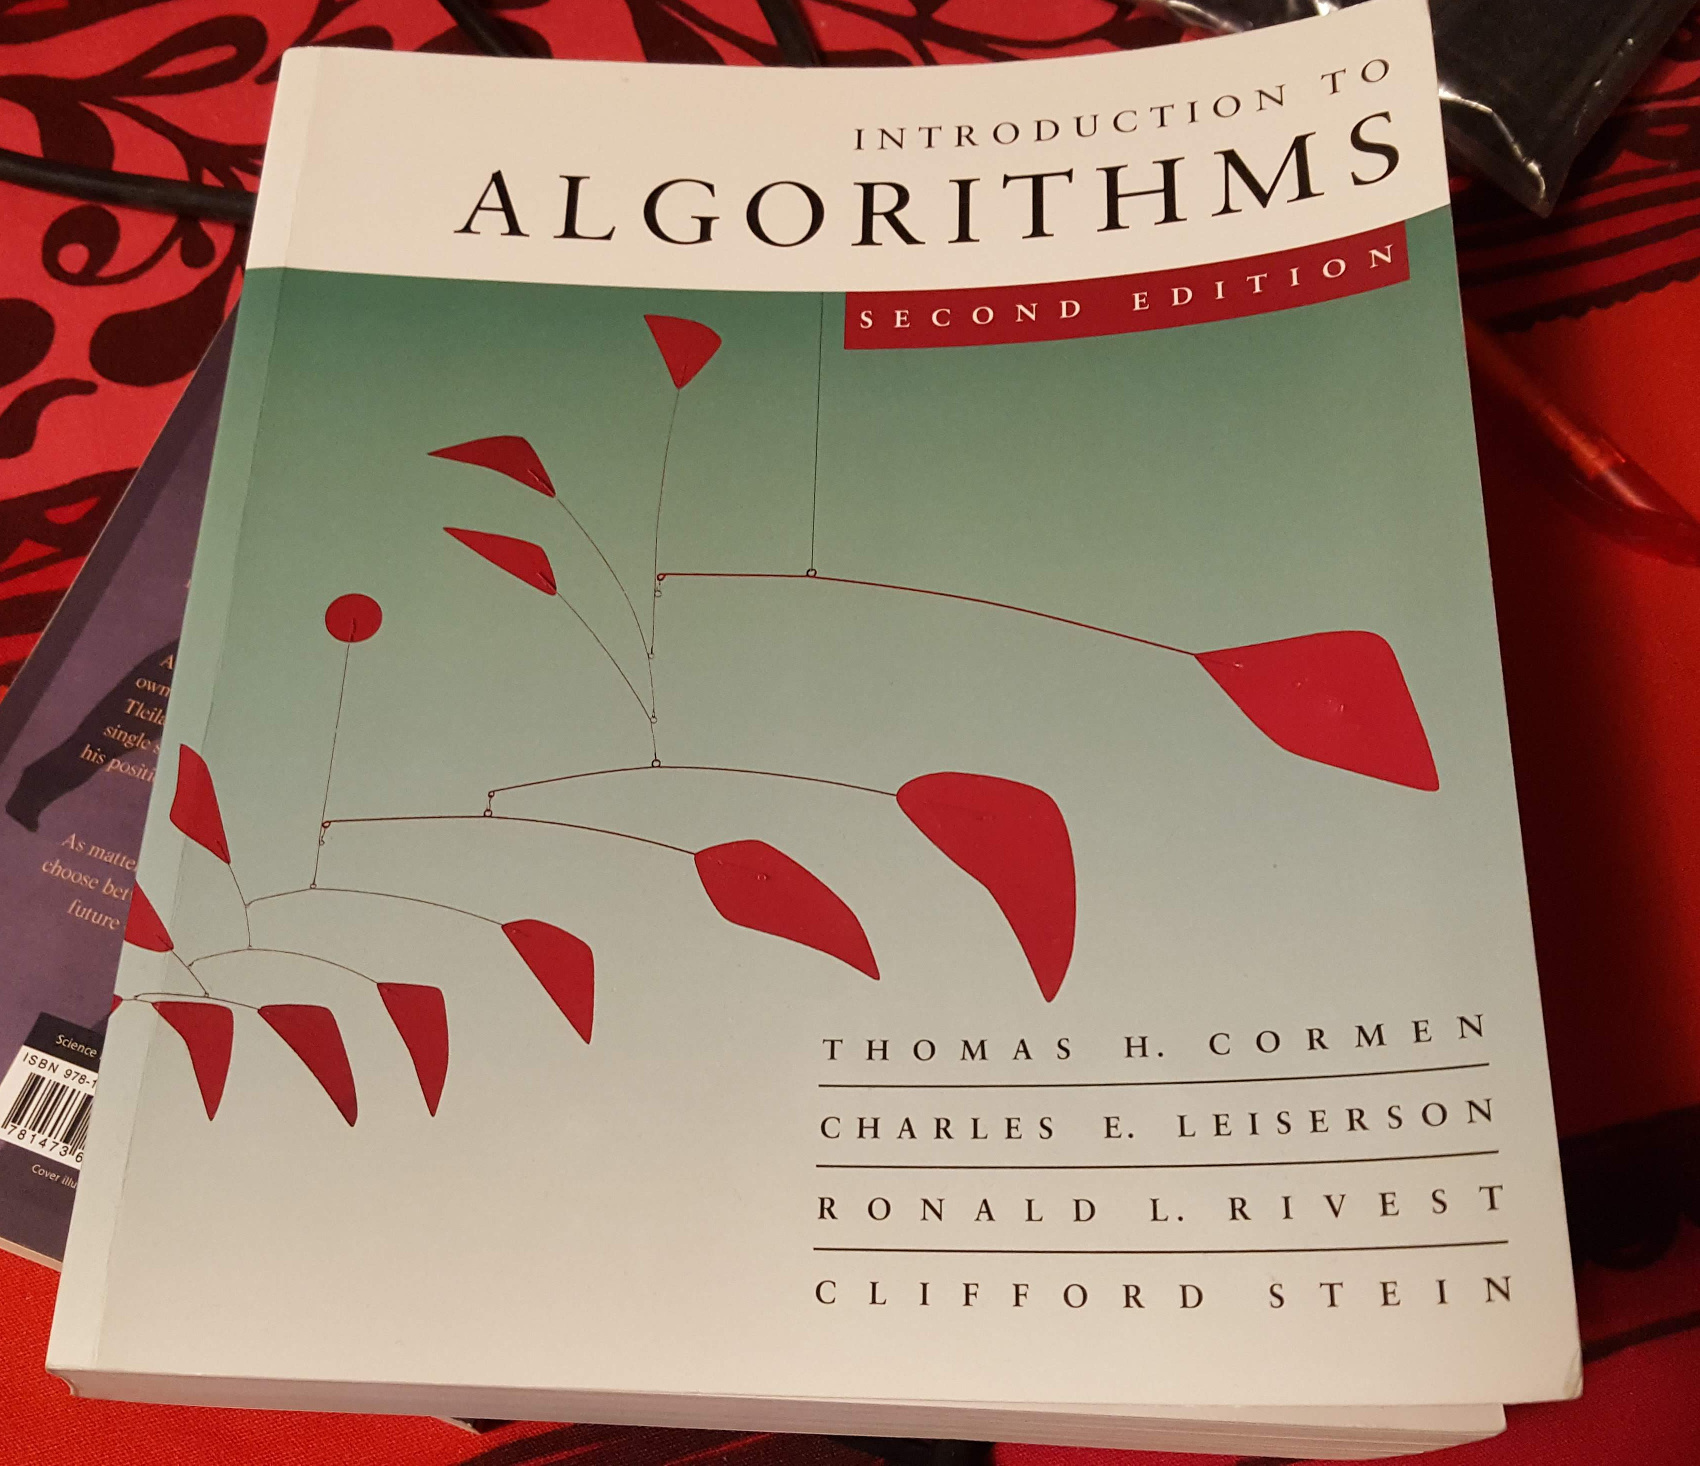 Book cover: Introduction to Algorithms, Second Edition.